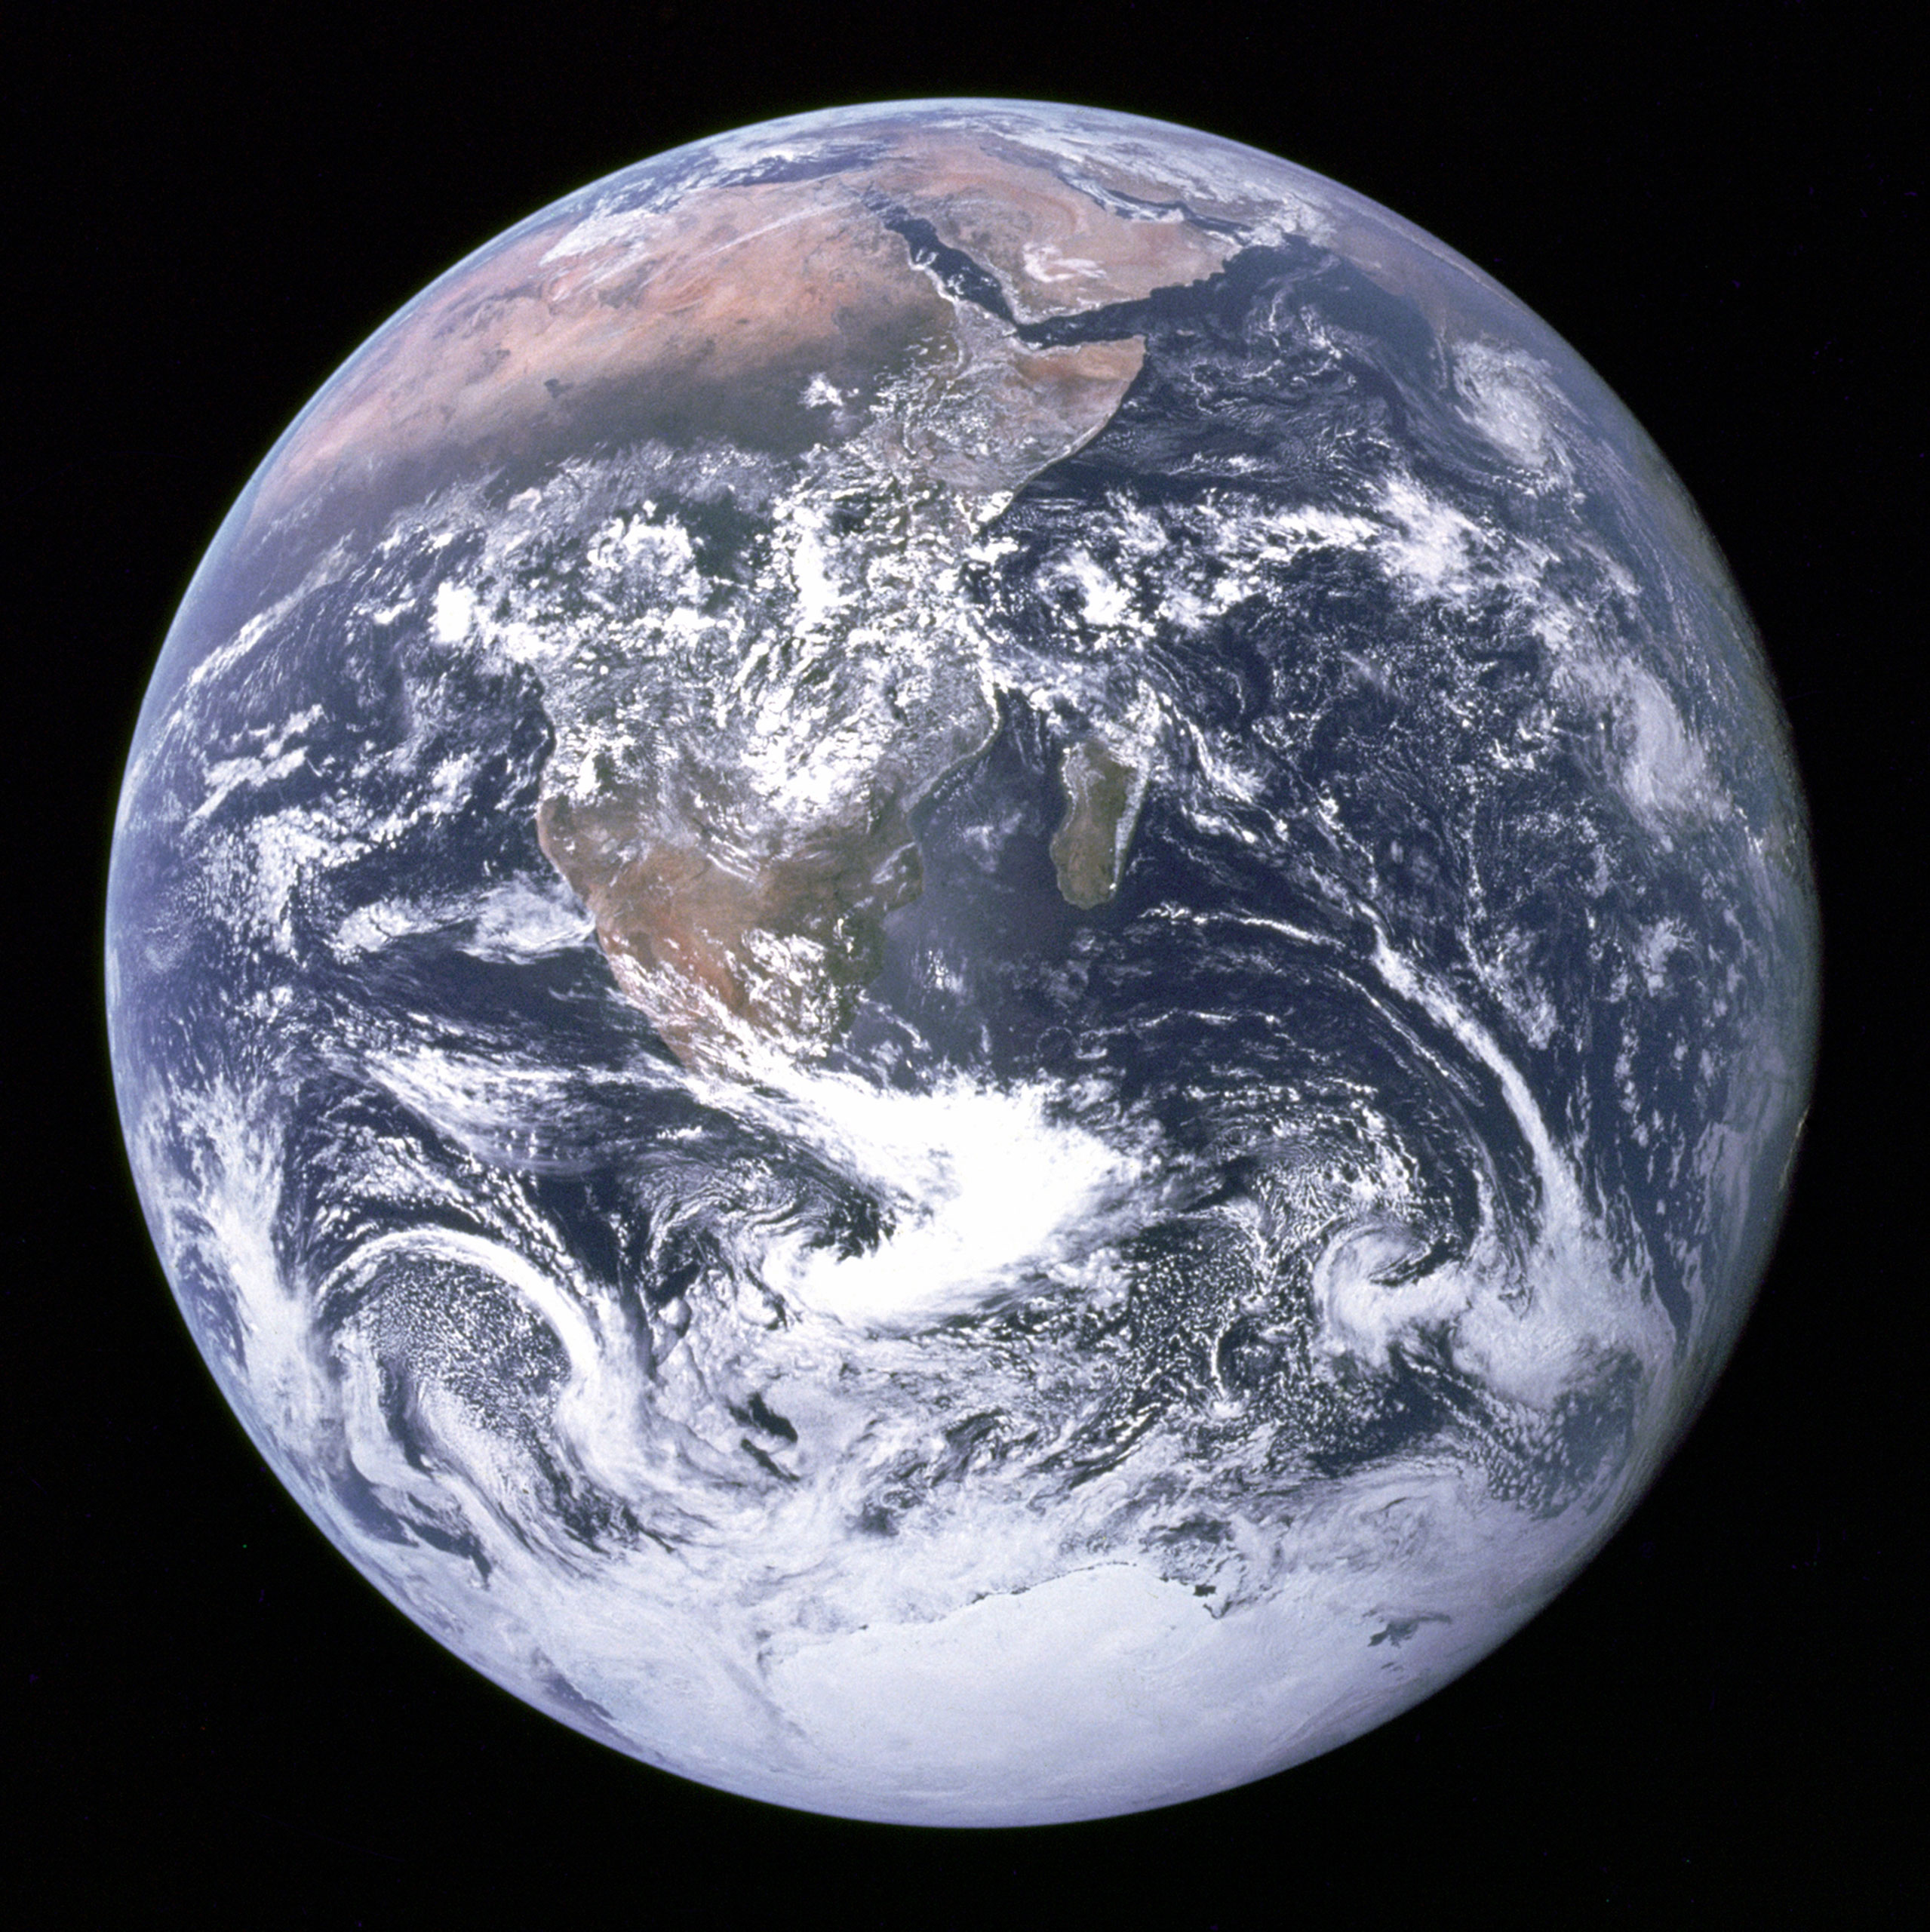 Blue Marble, 1972; The original  Blue Marble  was taken on Dec. 7, 1972, by the crew of the Apollo 17 spacecraft en route to the Moon at a distance of about 29,000 kilometres (18,000 mi). It shows Africa, Antarctica, and the Arabian Peninsula.